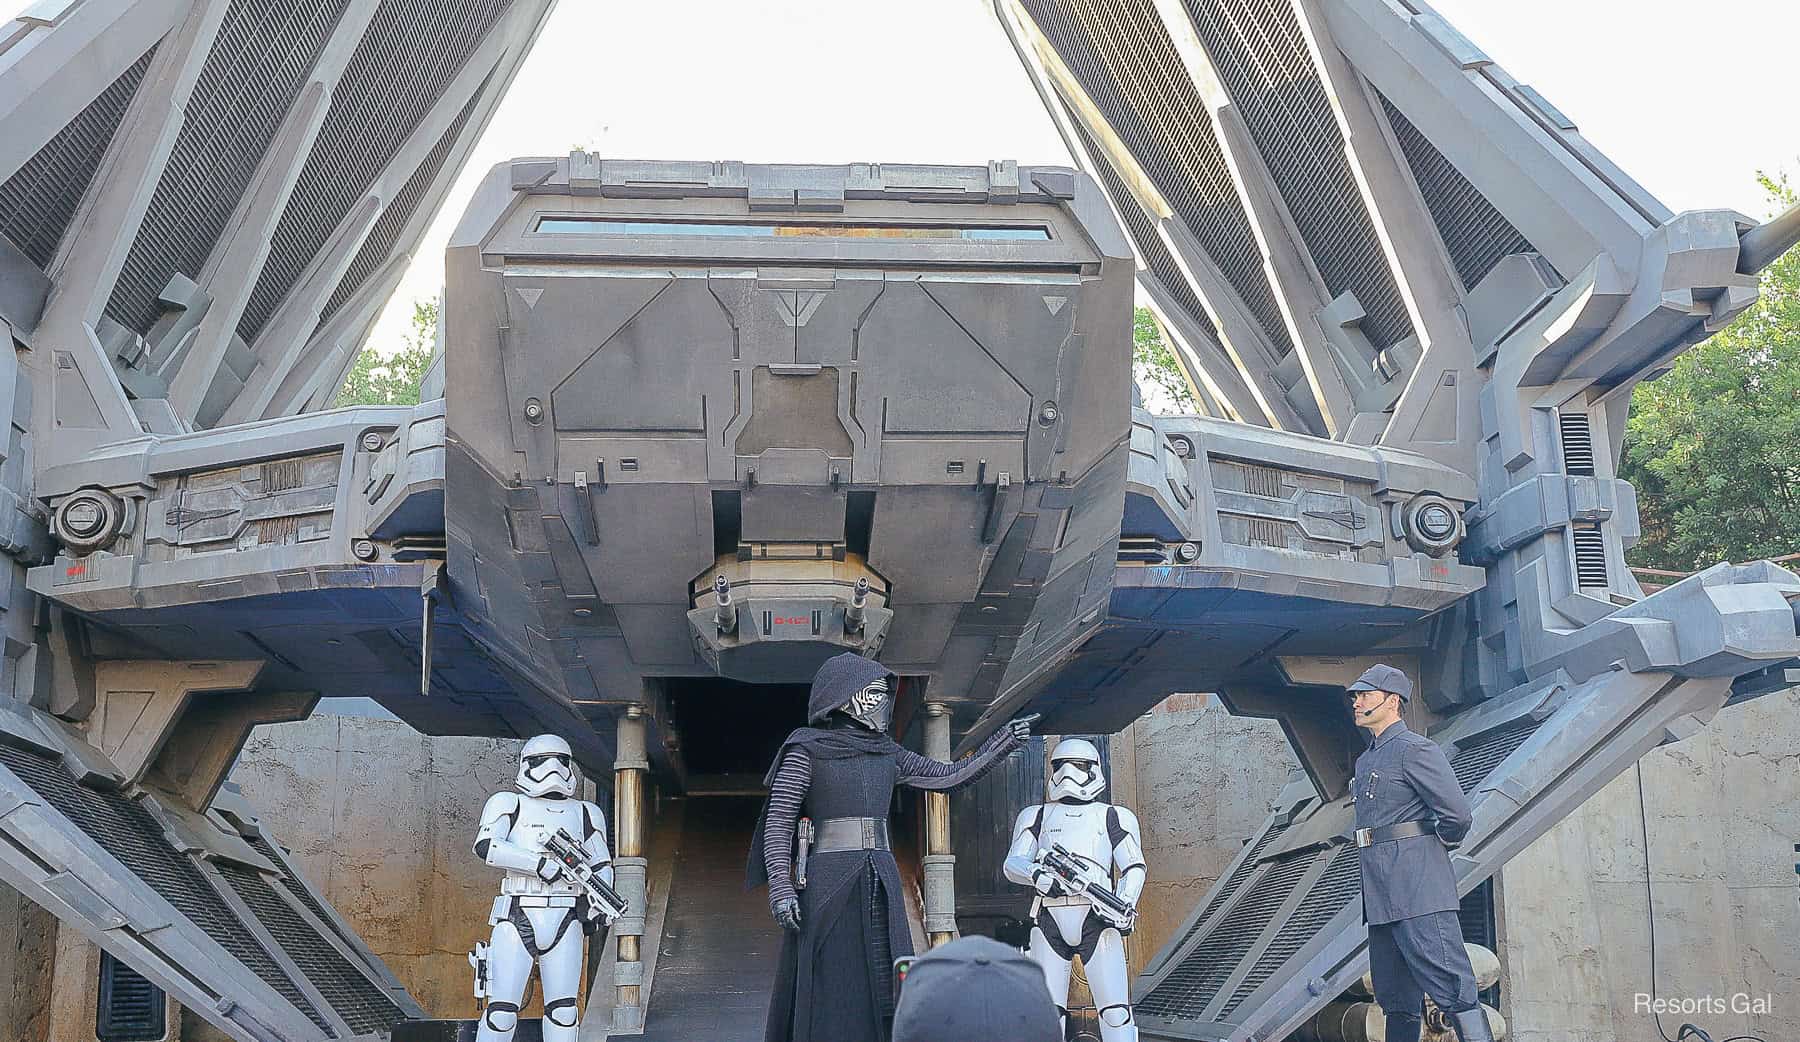 Seeing the ‘First Order Searches for the Resistance’ at Disney’s Hollywood Studios